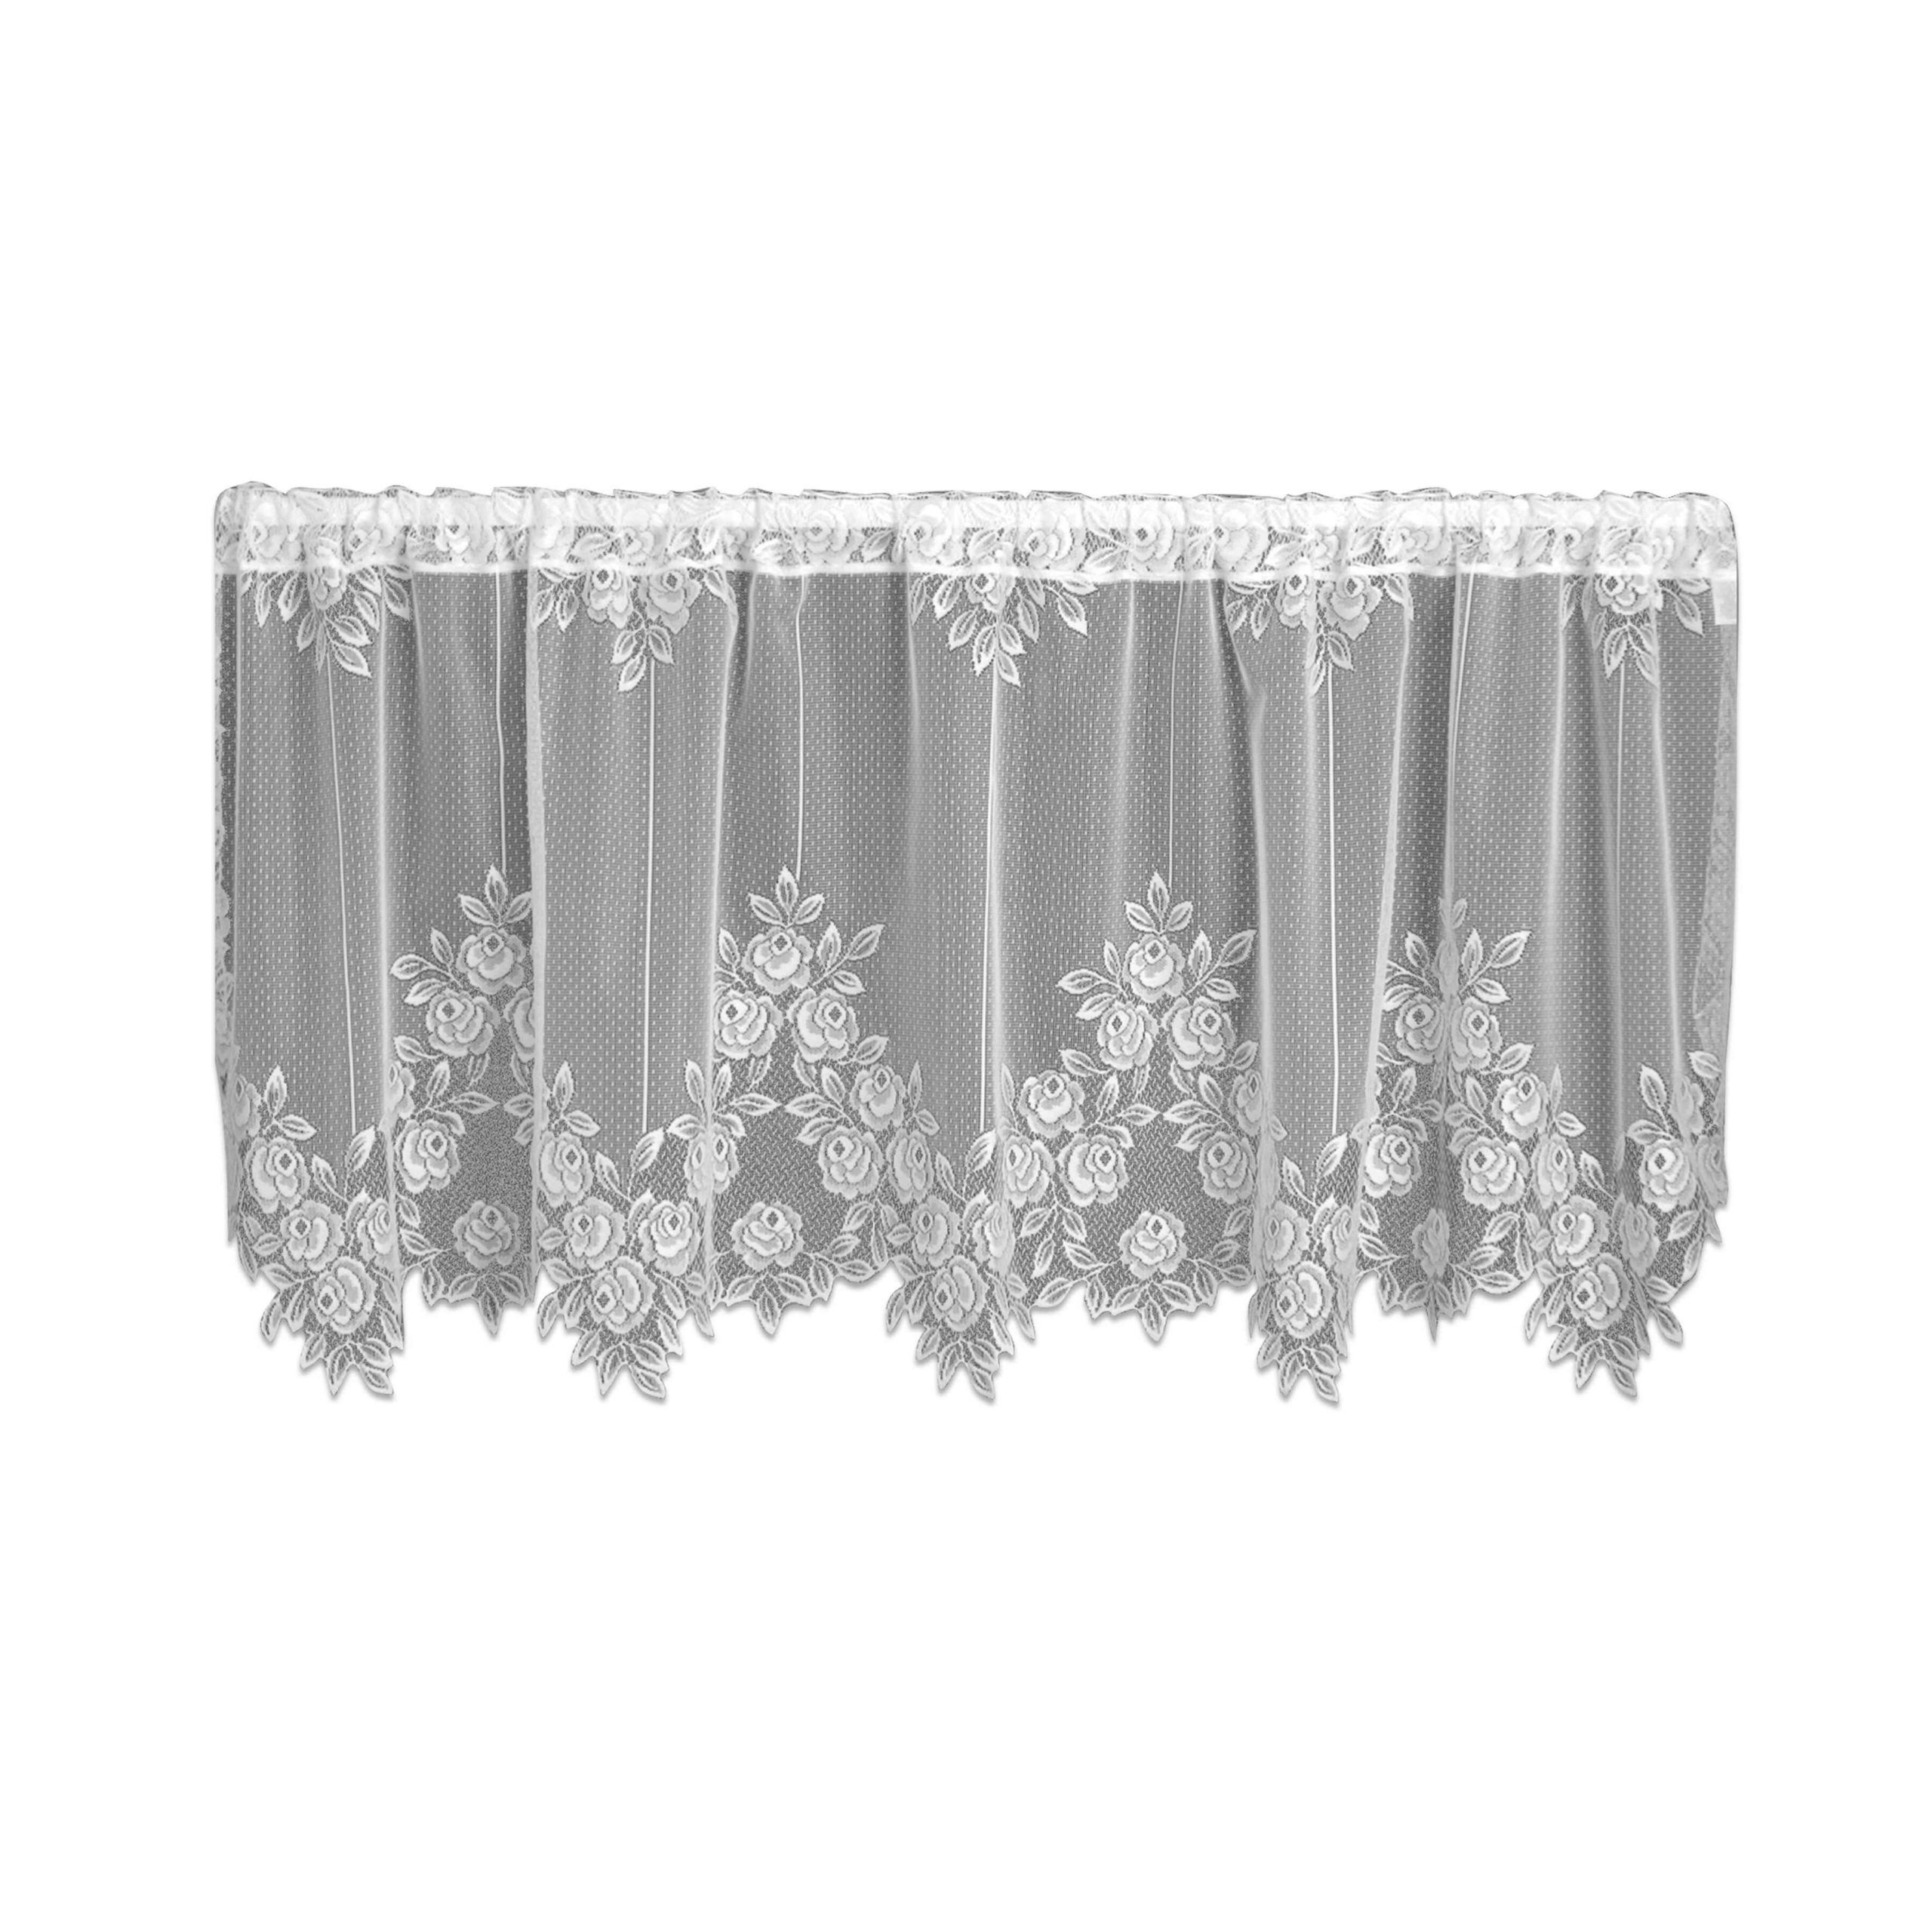 Appealing Lace Curtain Valances And Tiers Ideas Kitchen Within Luxurious Kitchen Curtains Tiers, Shade Or Valances (Photo 18 of 20)